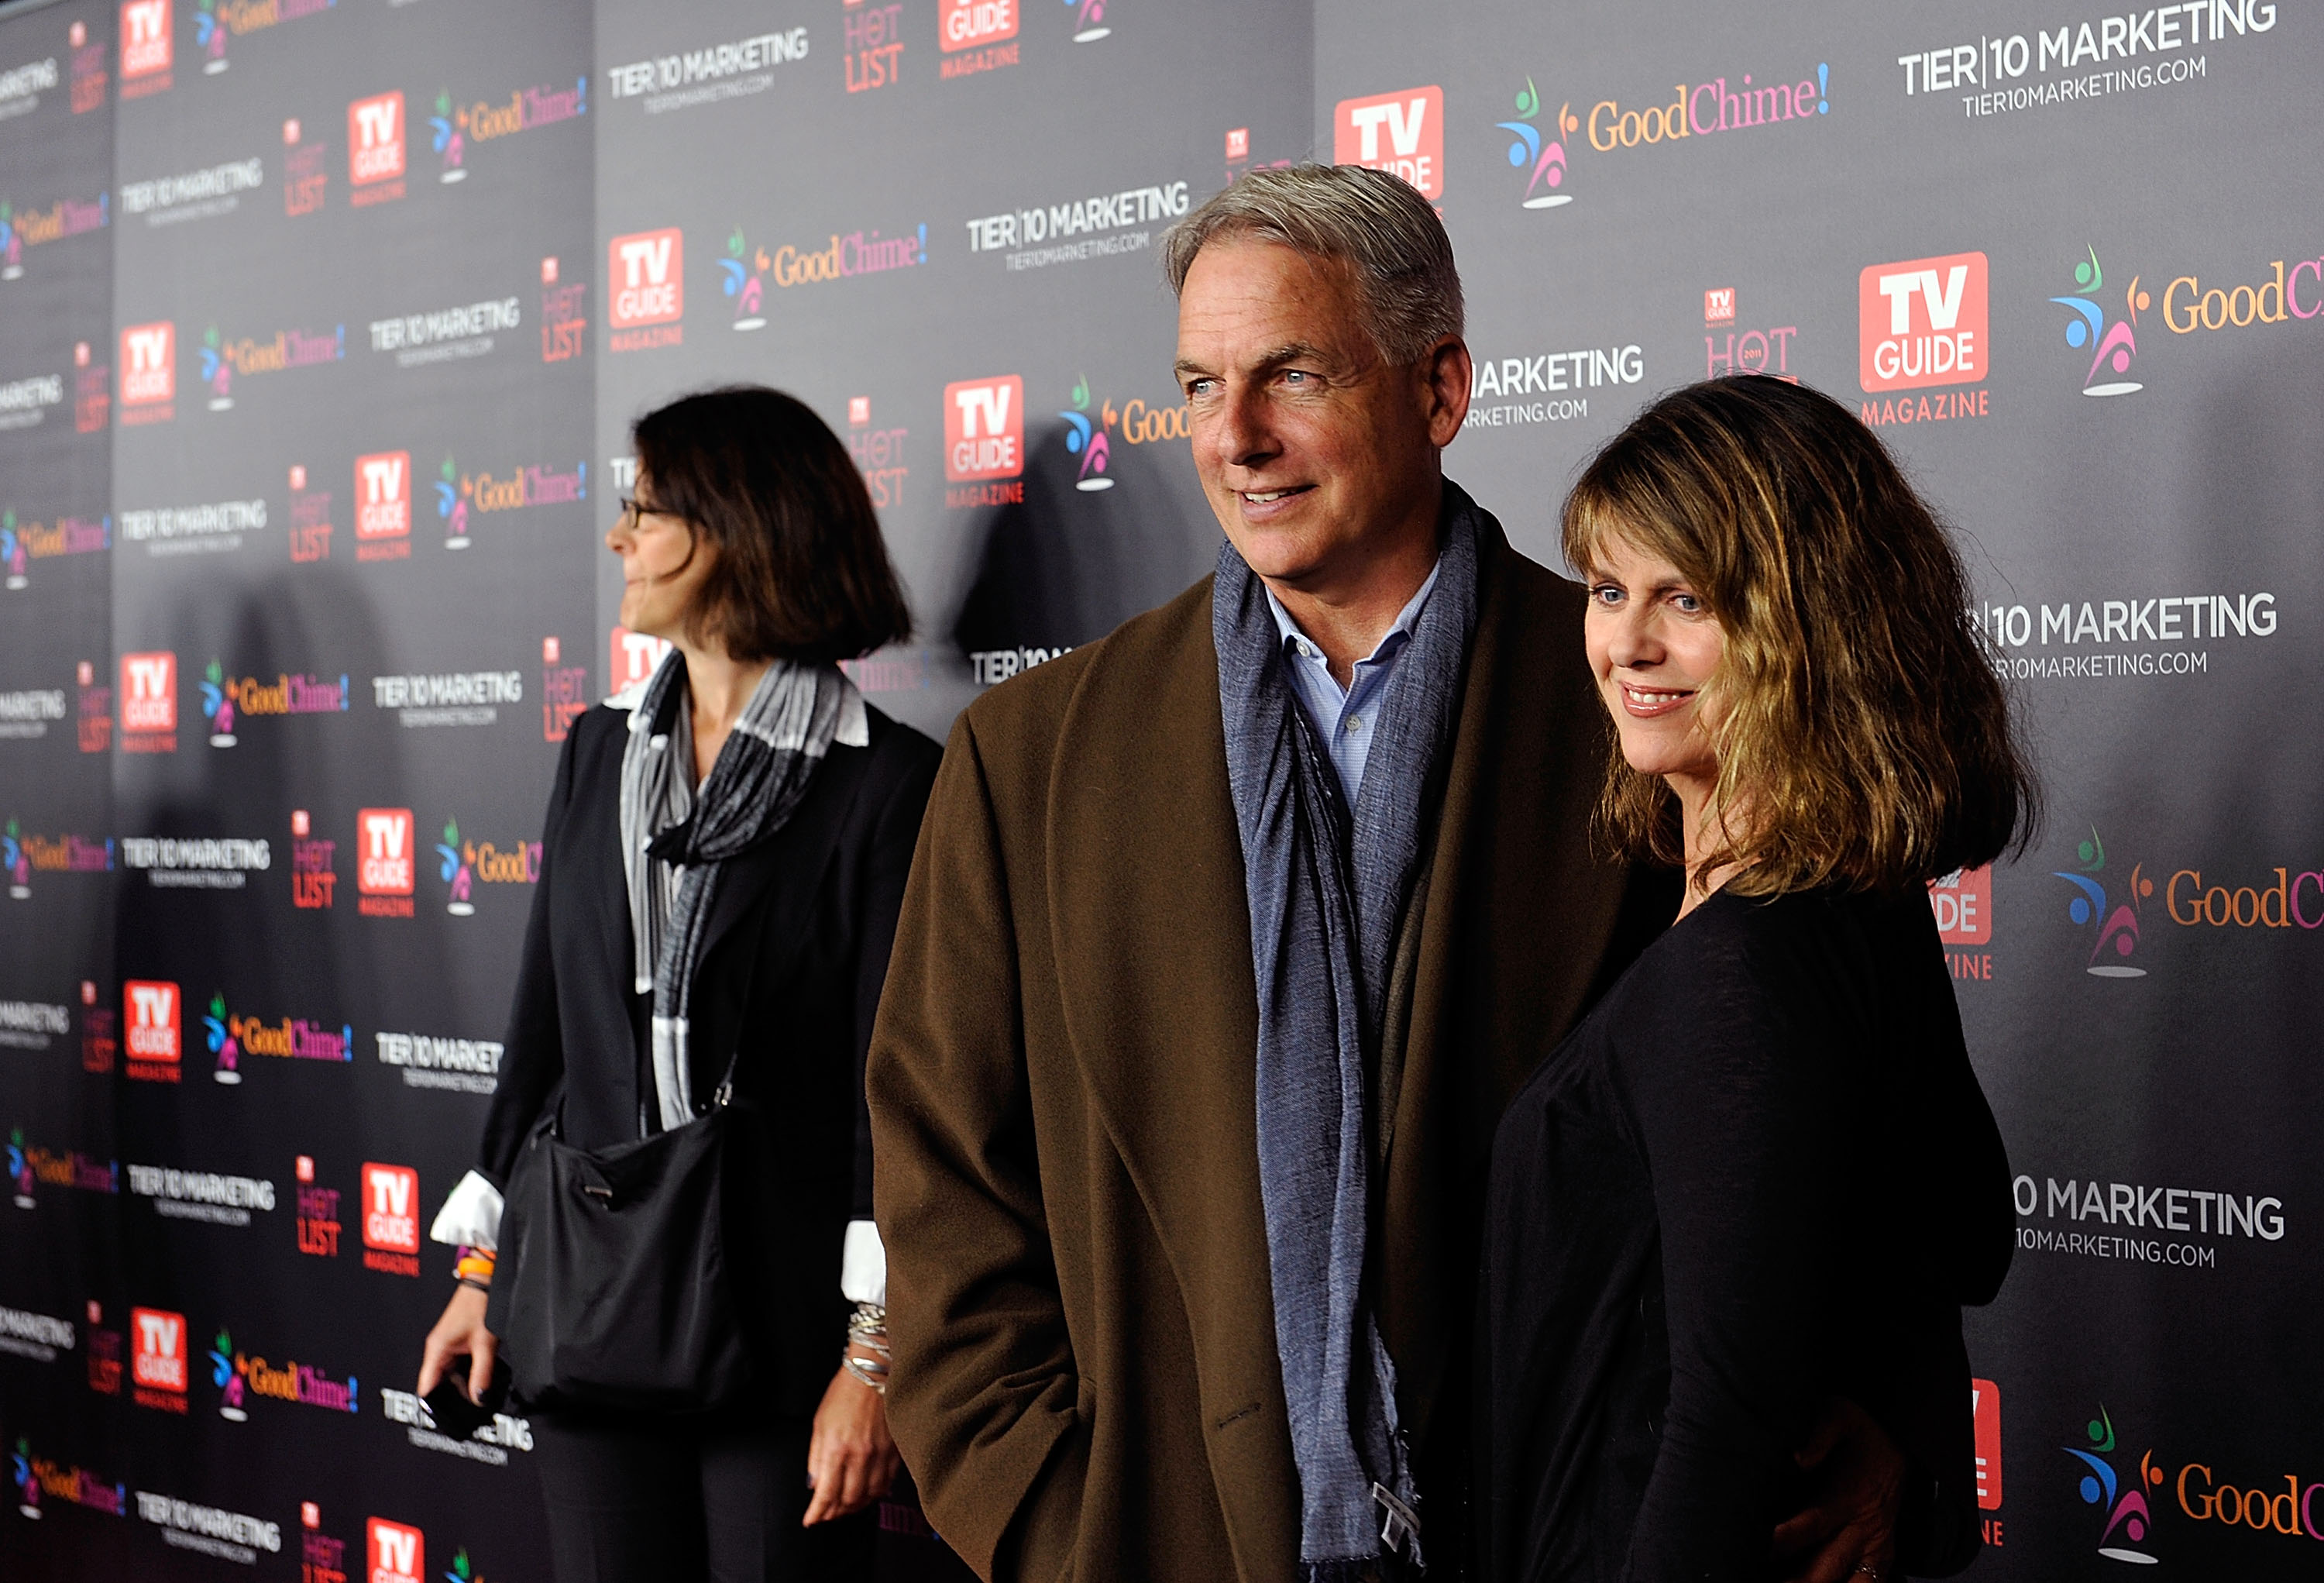 Mark Harmon at an event with Pam Dawber  